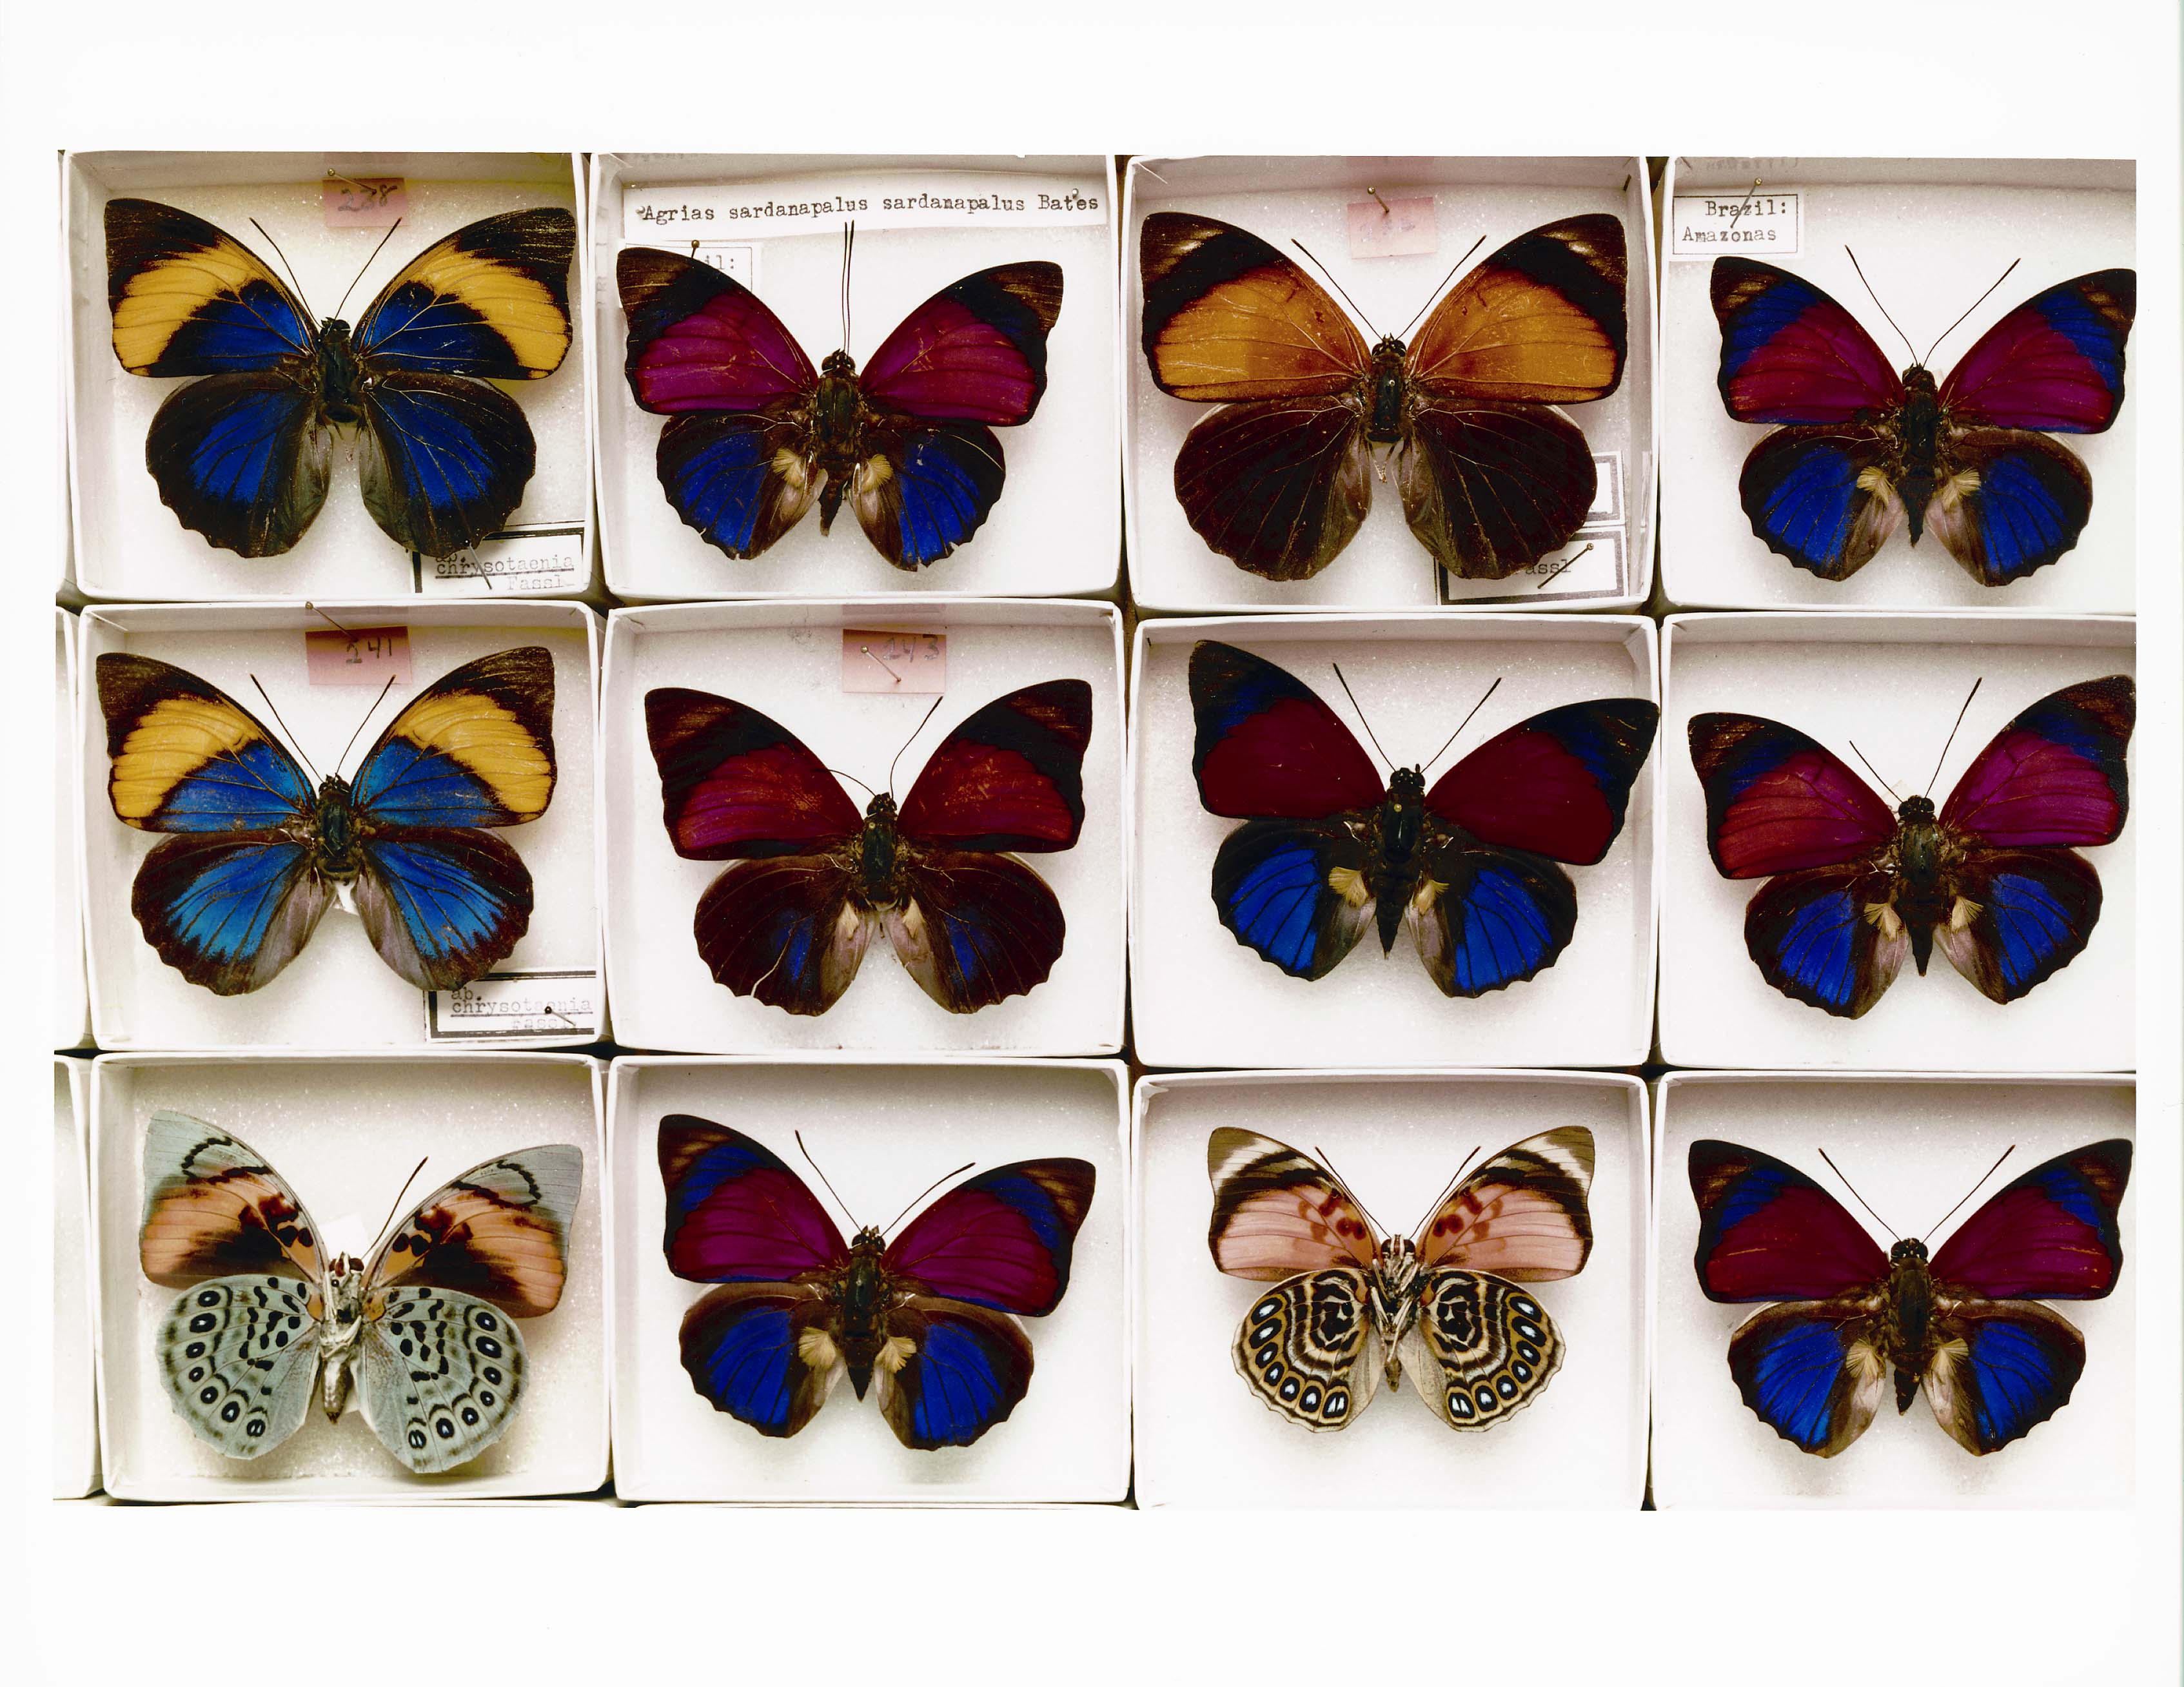 Butterfly specimens at the American Museum of Natural History